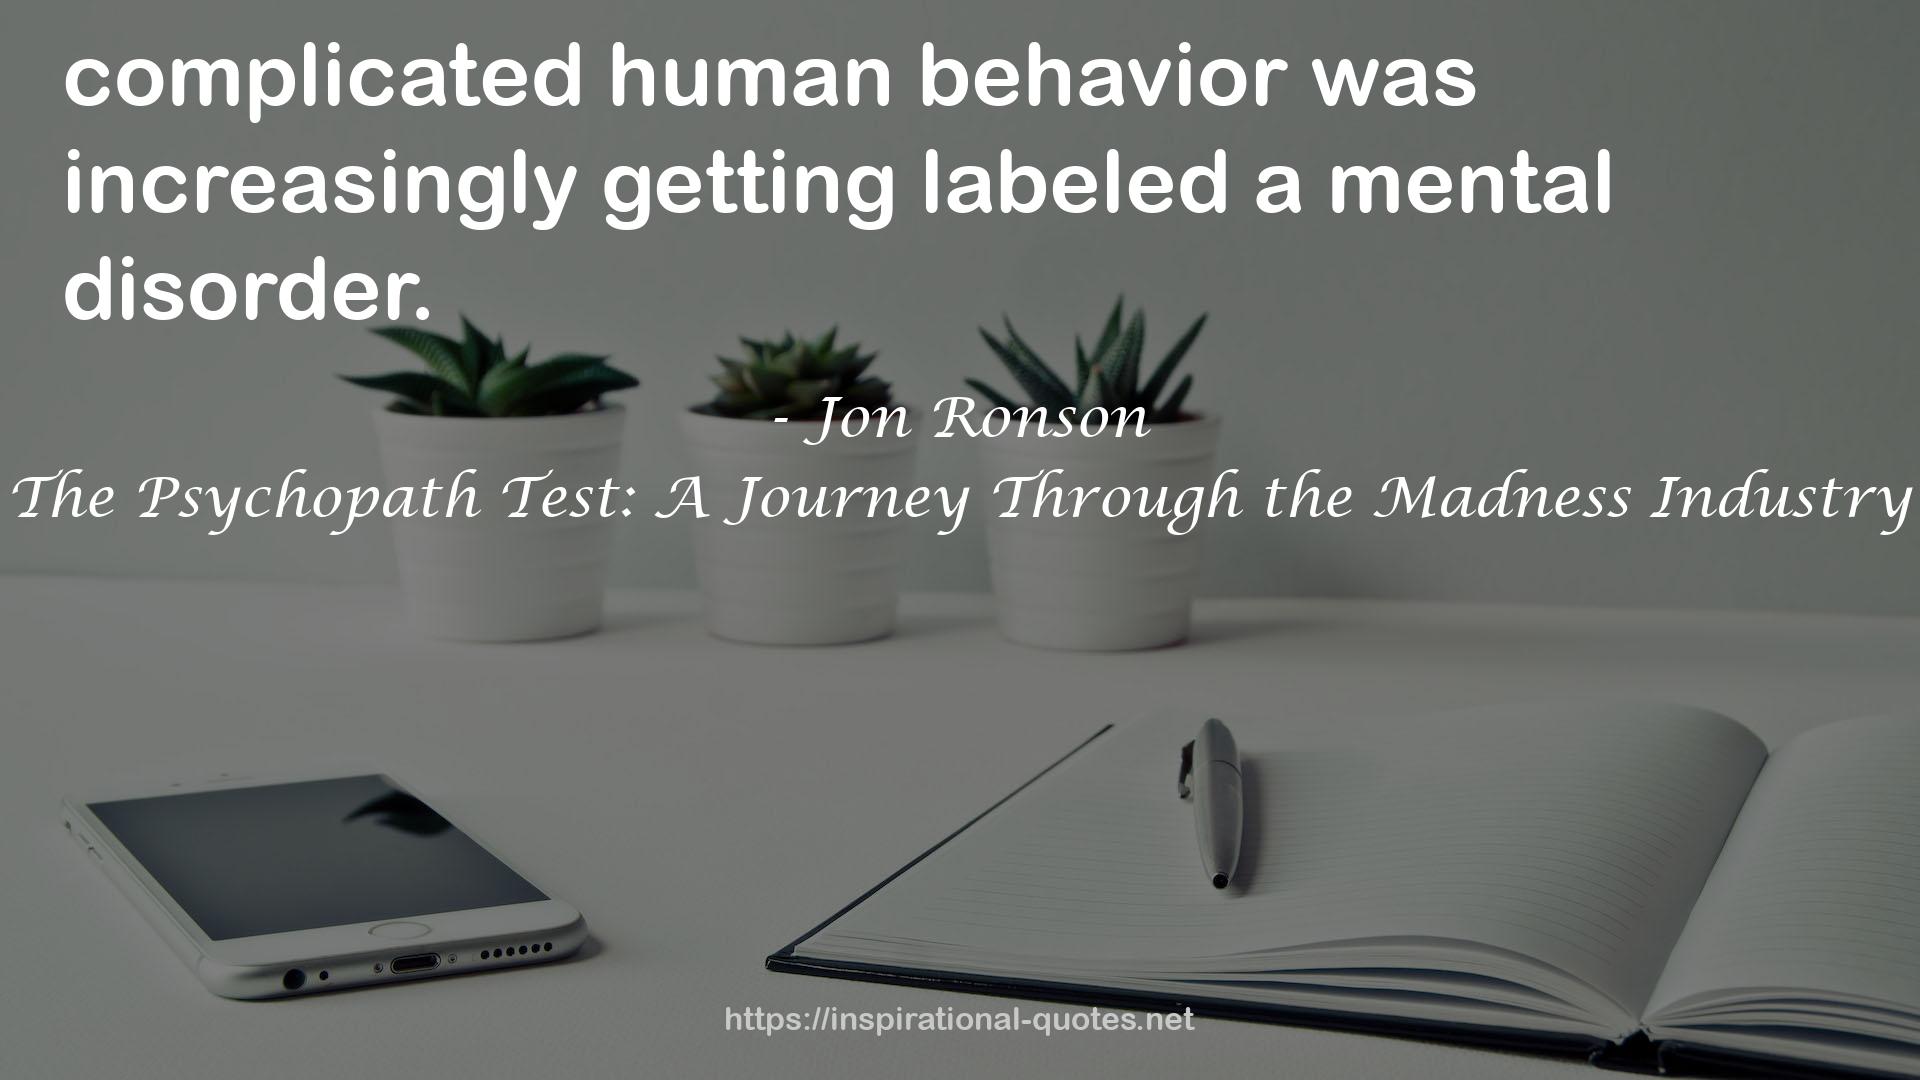 The Psychopath Test: A Journey Through the Madness Industry QUOTES